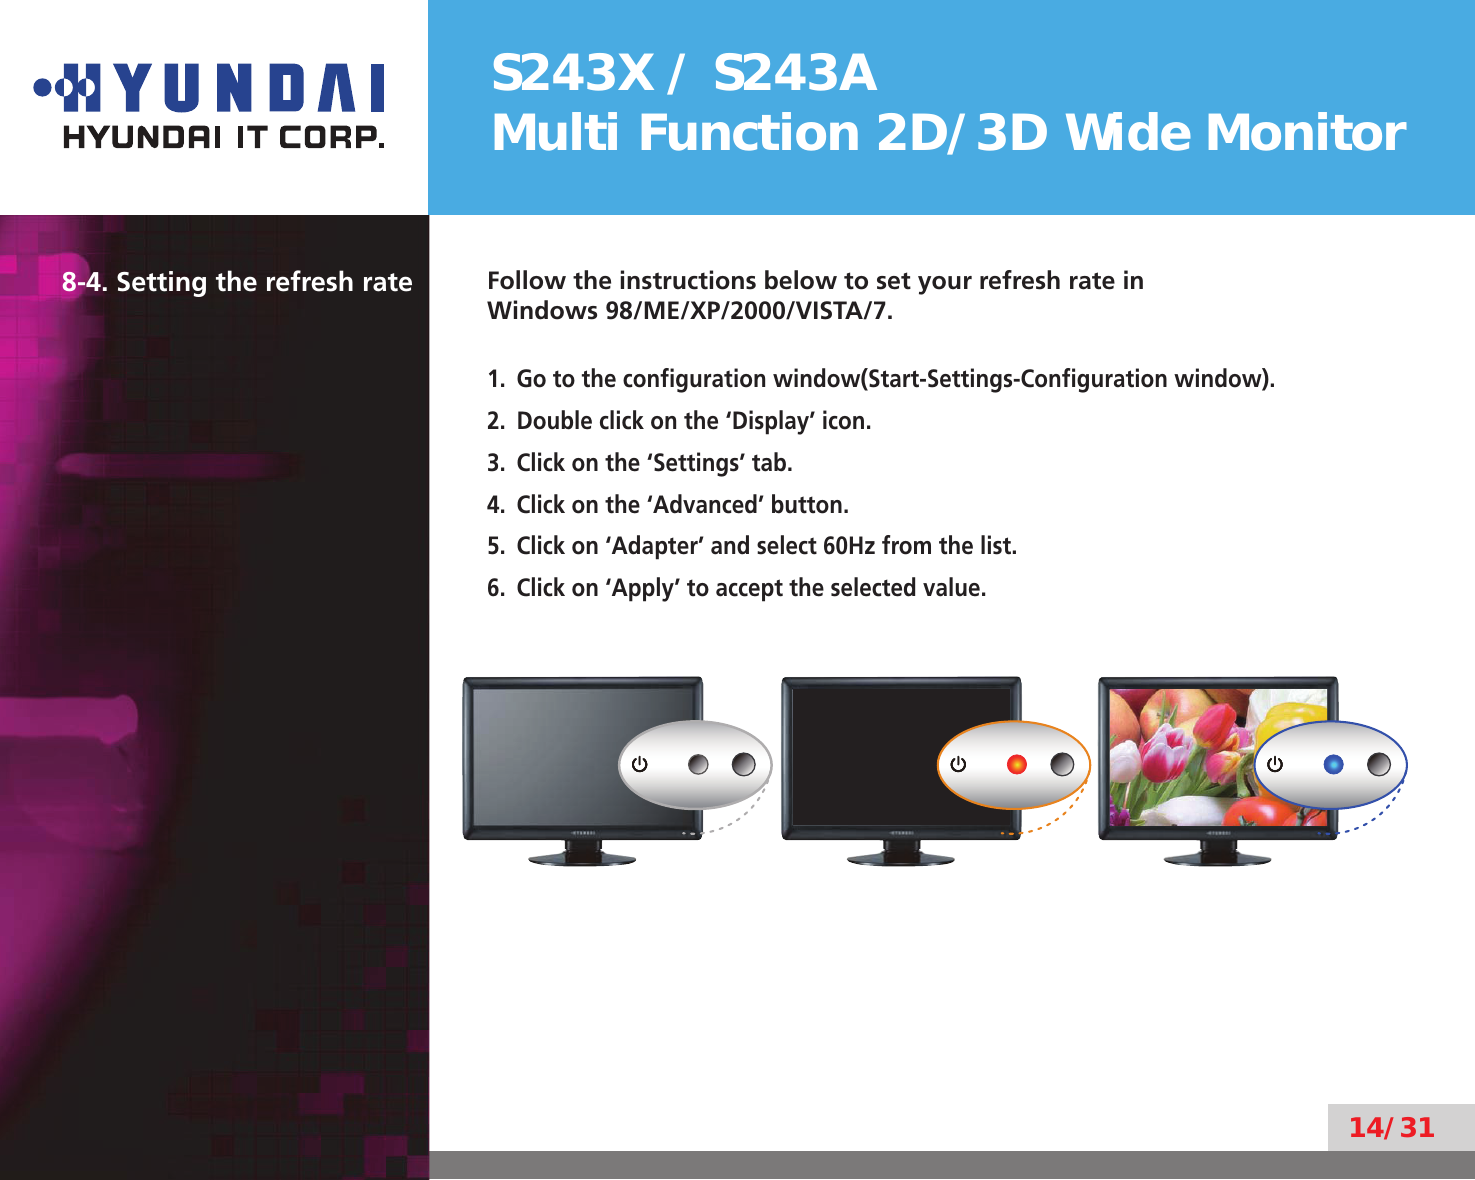 S243X / S243AMulti Function 2D/3D Wide Monitor14/318-4. Setting the refresh rate Follow the instructions below to set your refresh rate in  Windows 98/ME/XP/2000/VISTA/7.Go to the conﬁguration window(Start-Settings-Conﬁguration window).1. Double click on the ‘Display’ icon.2. Click on the ‘Settings’ tab.3. Click on the ‘Advanced’ button.4. Click on ‘Adapter’ and select 60Hz from the list.5. Click on ‘Apply’ to accept the selected value.6.  